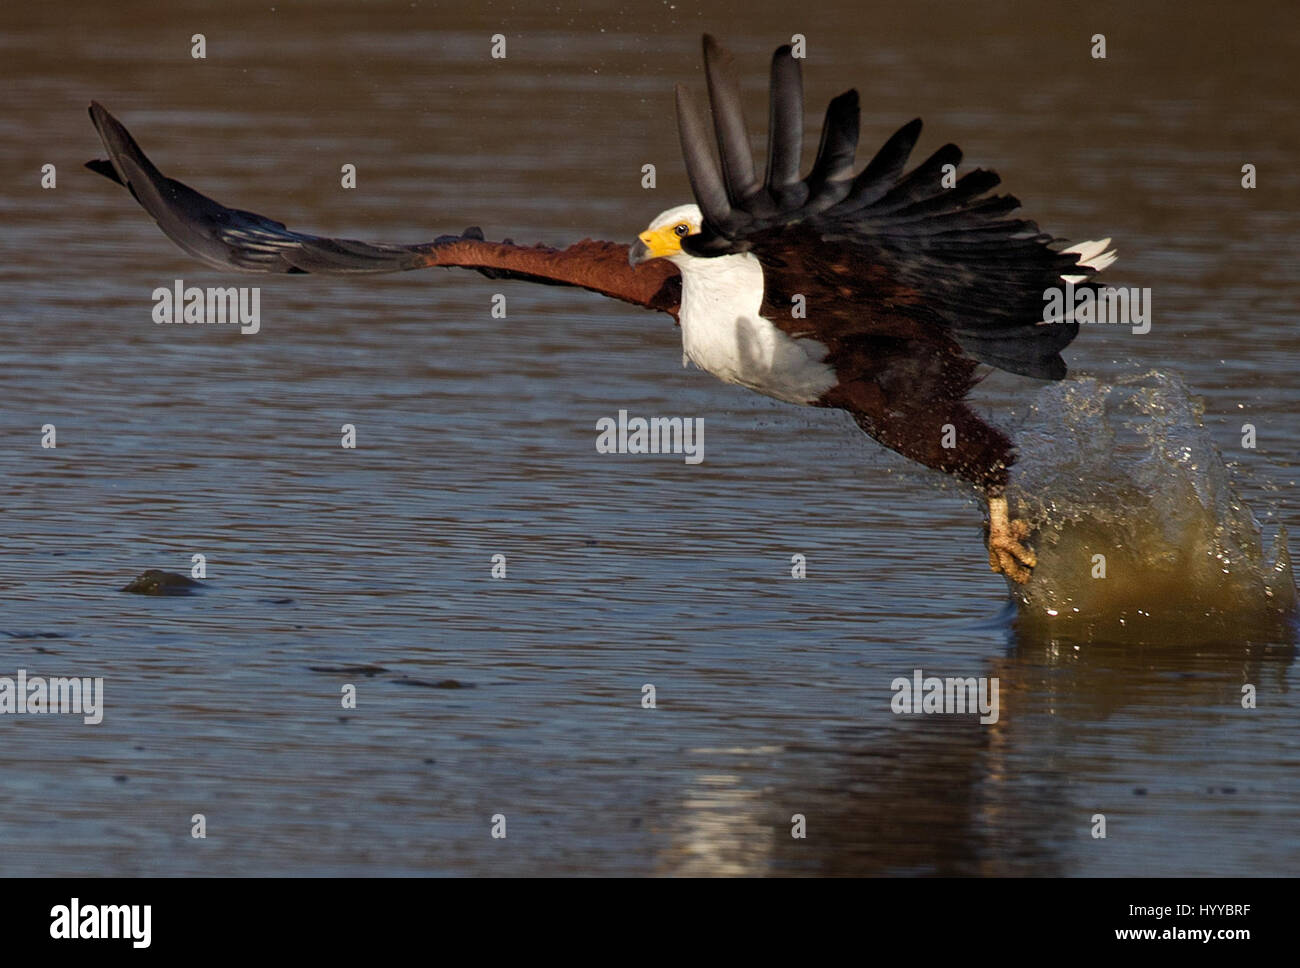 KRUGER NATIONAL PARK, SOUTH AFRICA: THE MOMENT a cheeky African Fish Eagle stole a hungry crocodile’s next meal has been captured by a gob-smacked tourist. The stunning shots show the large seven-pound eagle swoop in low to the water’s surface to catch a fish before flying off again. A peeved crocodile can be seen just behind the eagle as it looks forlornly at its catch escaping in the bird’s talons. While the fish would have only been an appetiser for the hungry croc it looks like it would make a substantial meal for the crafty eagle. The snaps were taken in Lower Sabie Dam in the Kruger Nati Stock Photo